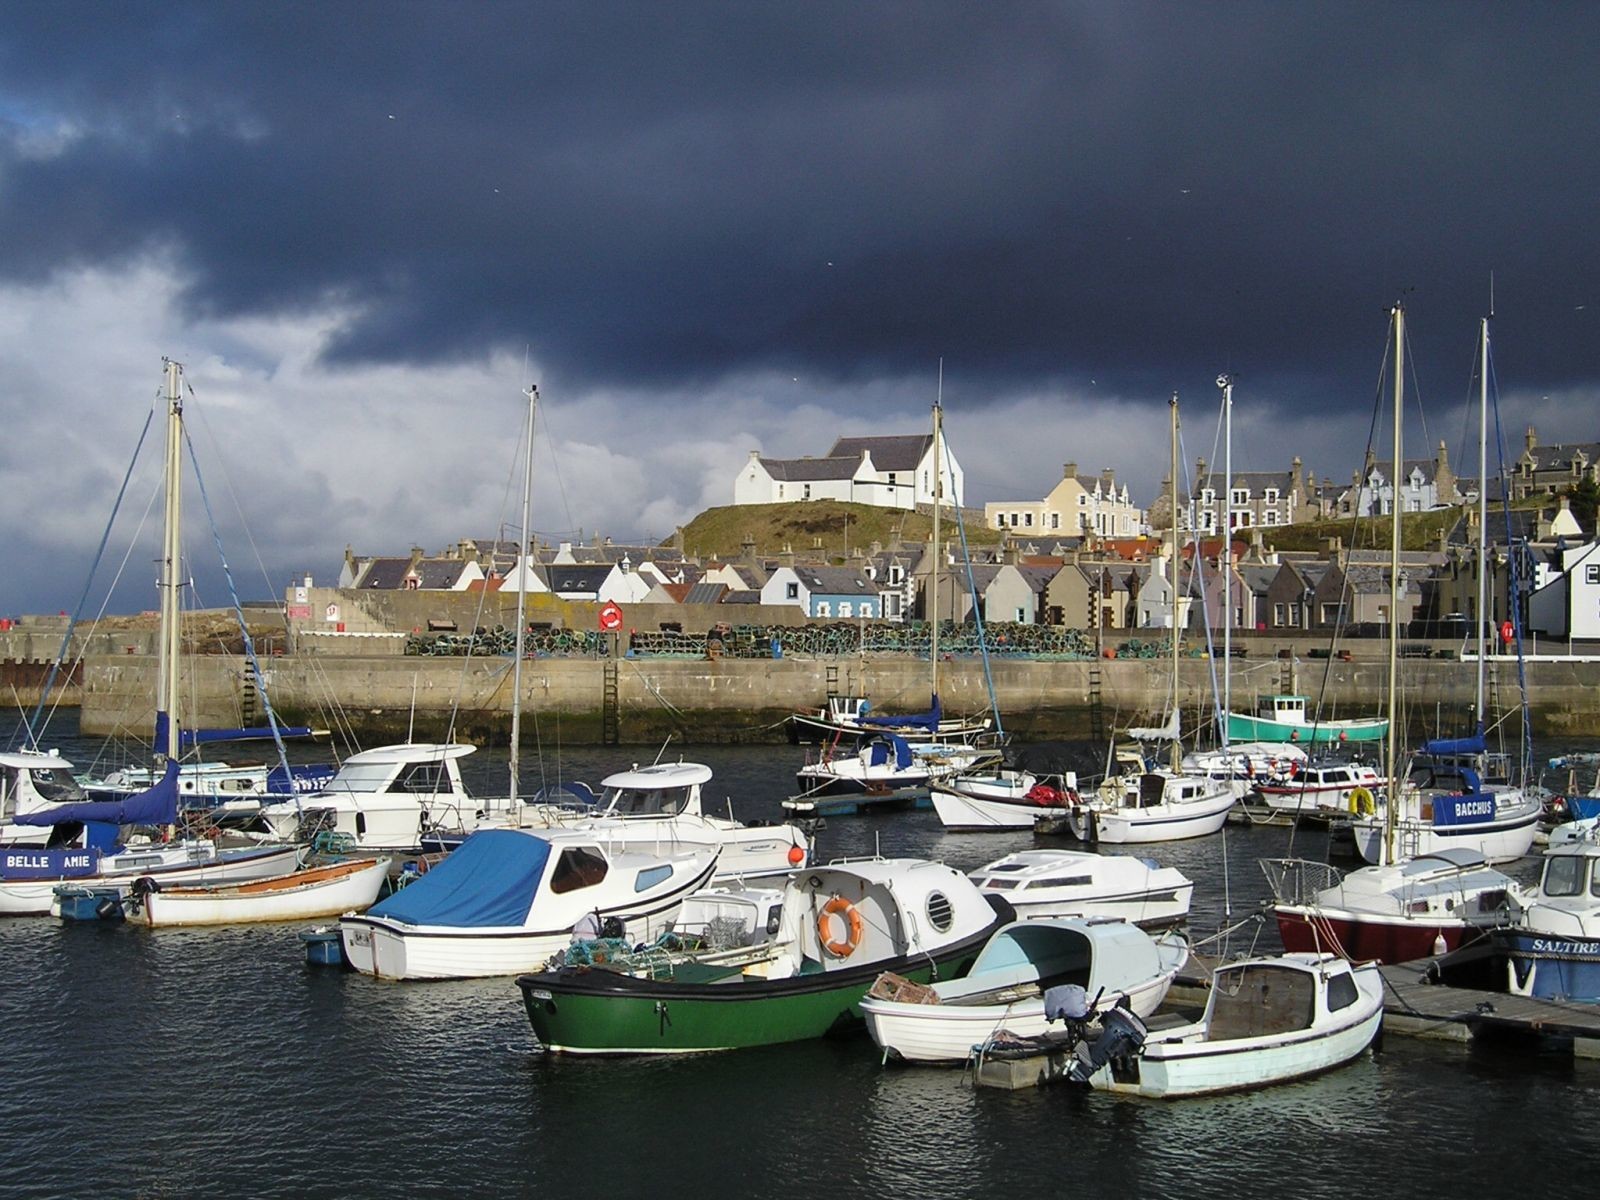 Storm clouds gather over Findochty harbour